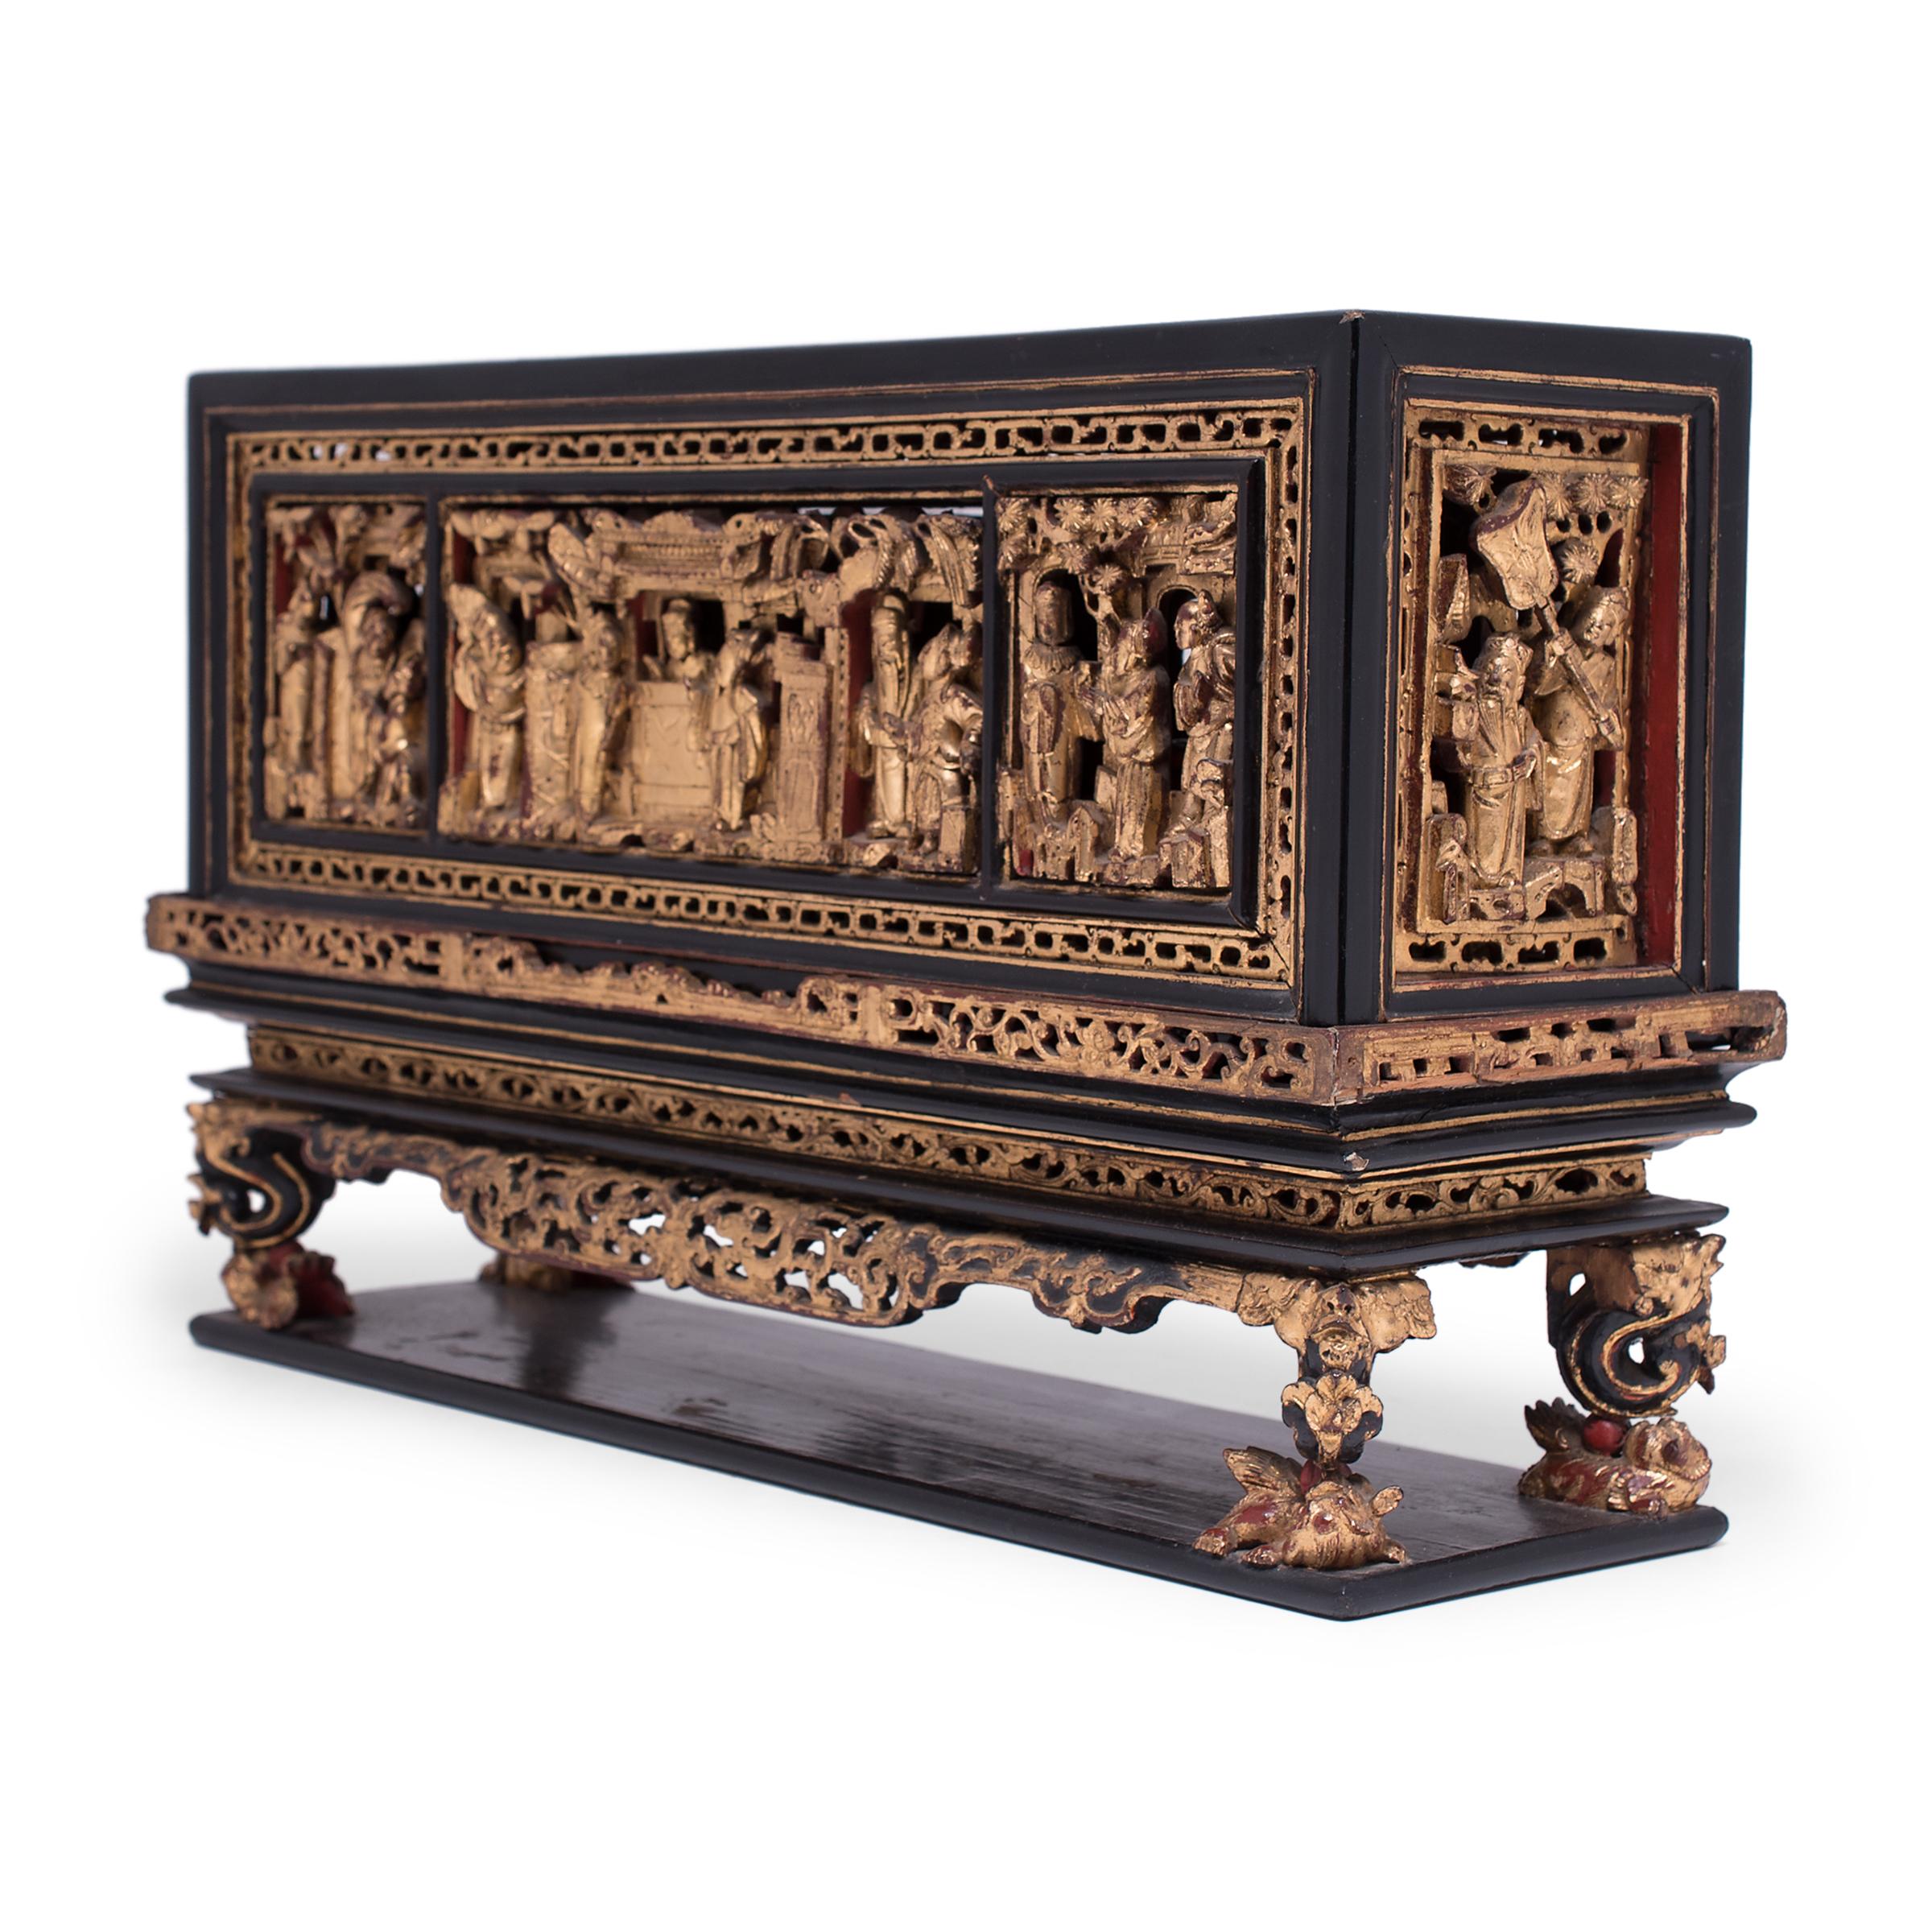 This dazzling display of intricate carvings and gilt lacquer is a 19th-century box used for dispersing smoke from burning incense. Incense made from dried aromatic plants and essential oils would be burned within the home to cleanse interiors and